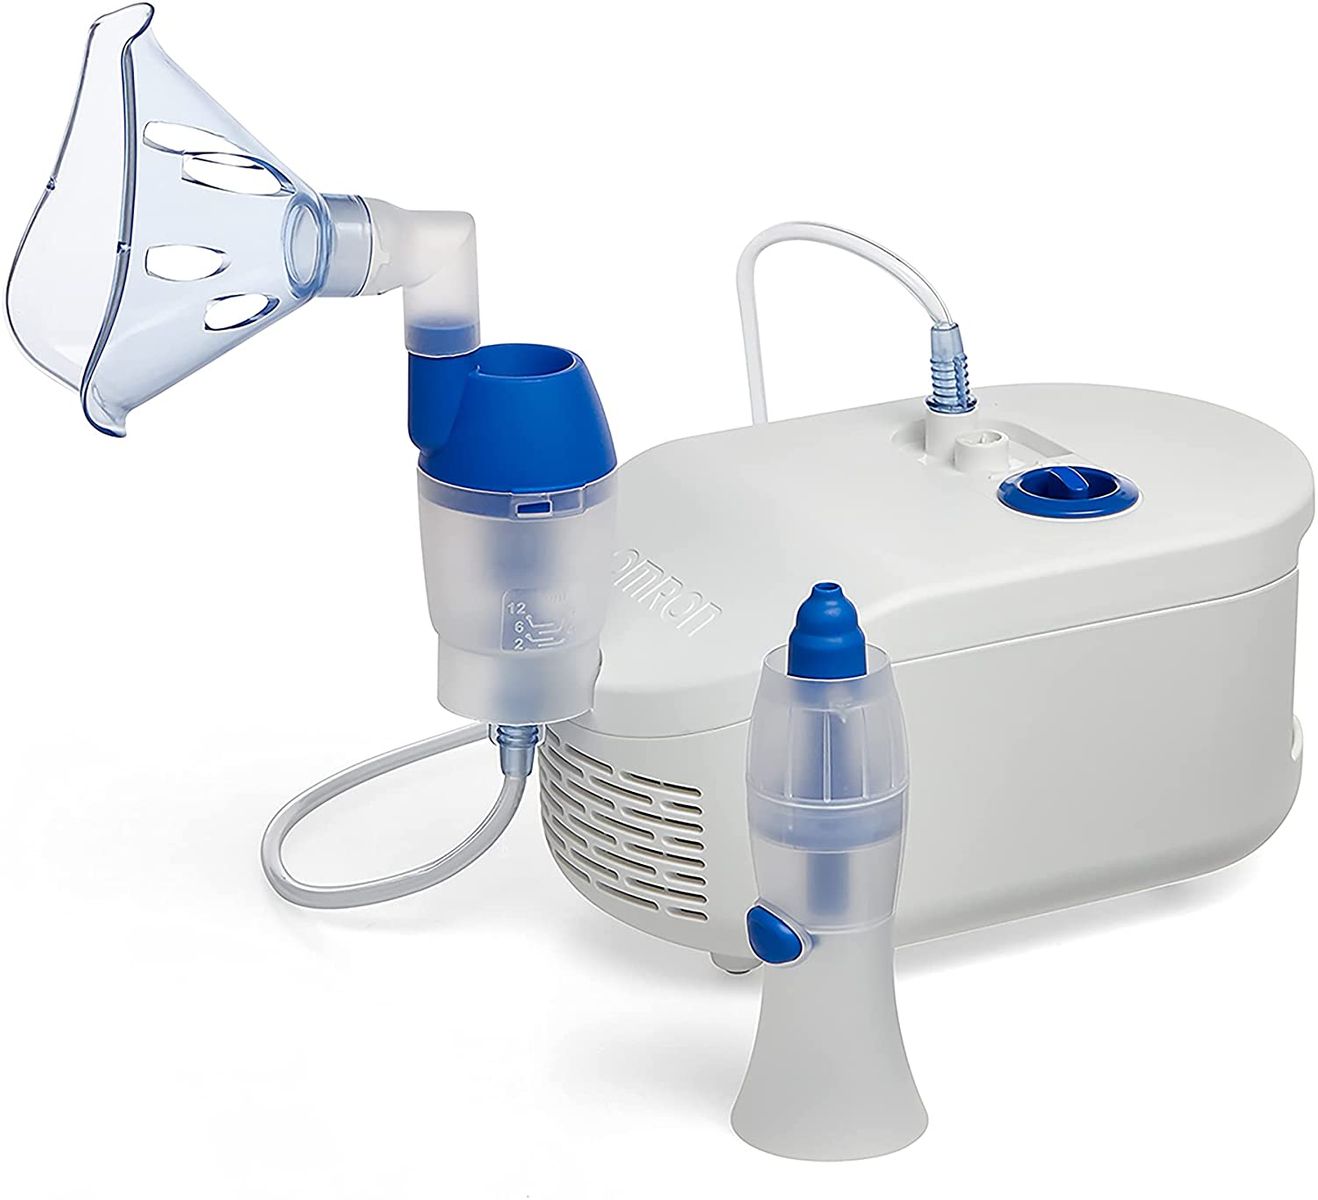 OMRON X102 Total Nebulizer 2in1 with Nasal Shower - Home Use Aerosol Device Kit, Treatment of Respiratory Diseases such as Asthma, Colds, Cough, Allergies in Adults and Children